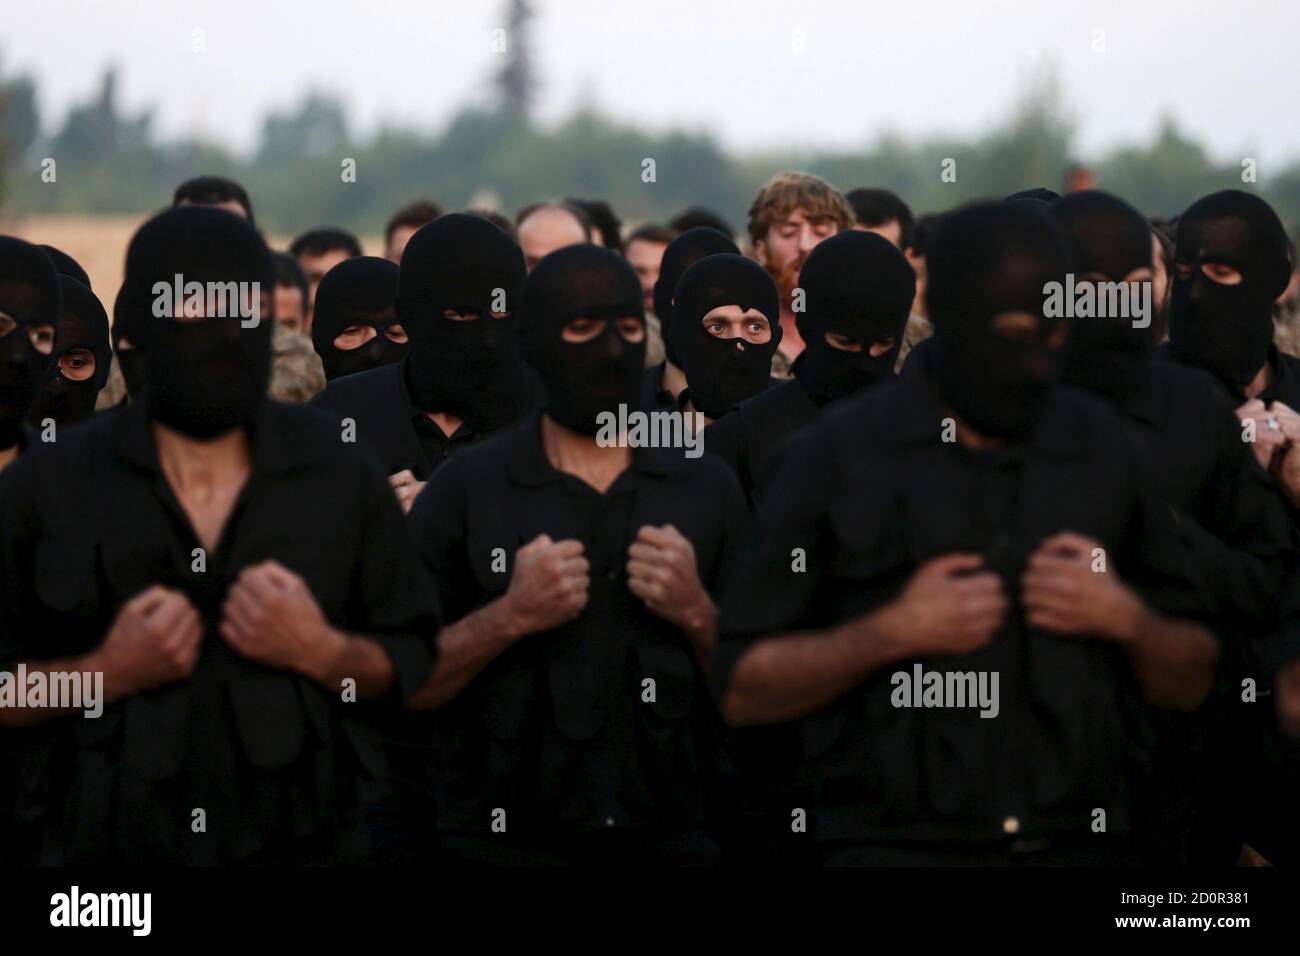 Rebel fighters take part in a military display as part of a graduation ceremony at a camp in eastern al-Ghouta, near Damascus, Syria July 12, 2015. The newly graduated rebel fighters, who went through military training, will join the the Free Syrian Army's Al Rahman legion. REUTERS/Bassam Khabieh      TPX IMAGES OF THE DAY Stock Photo